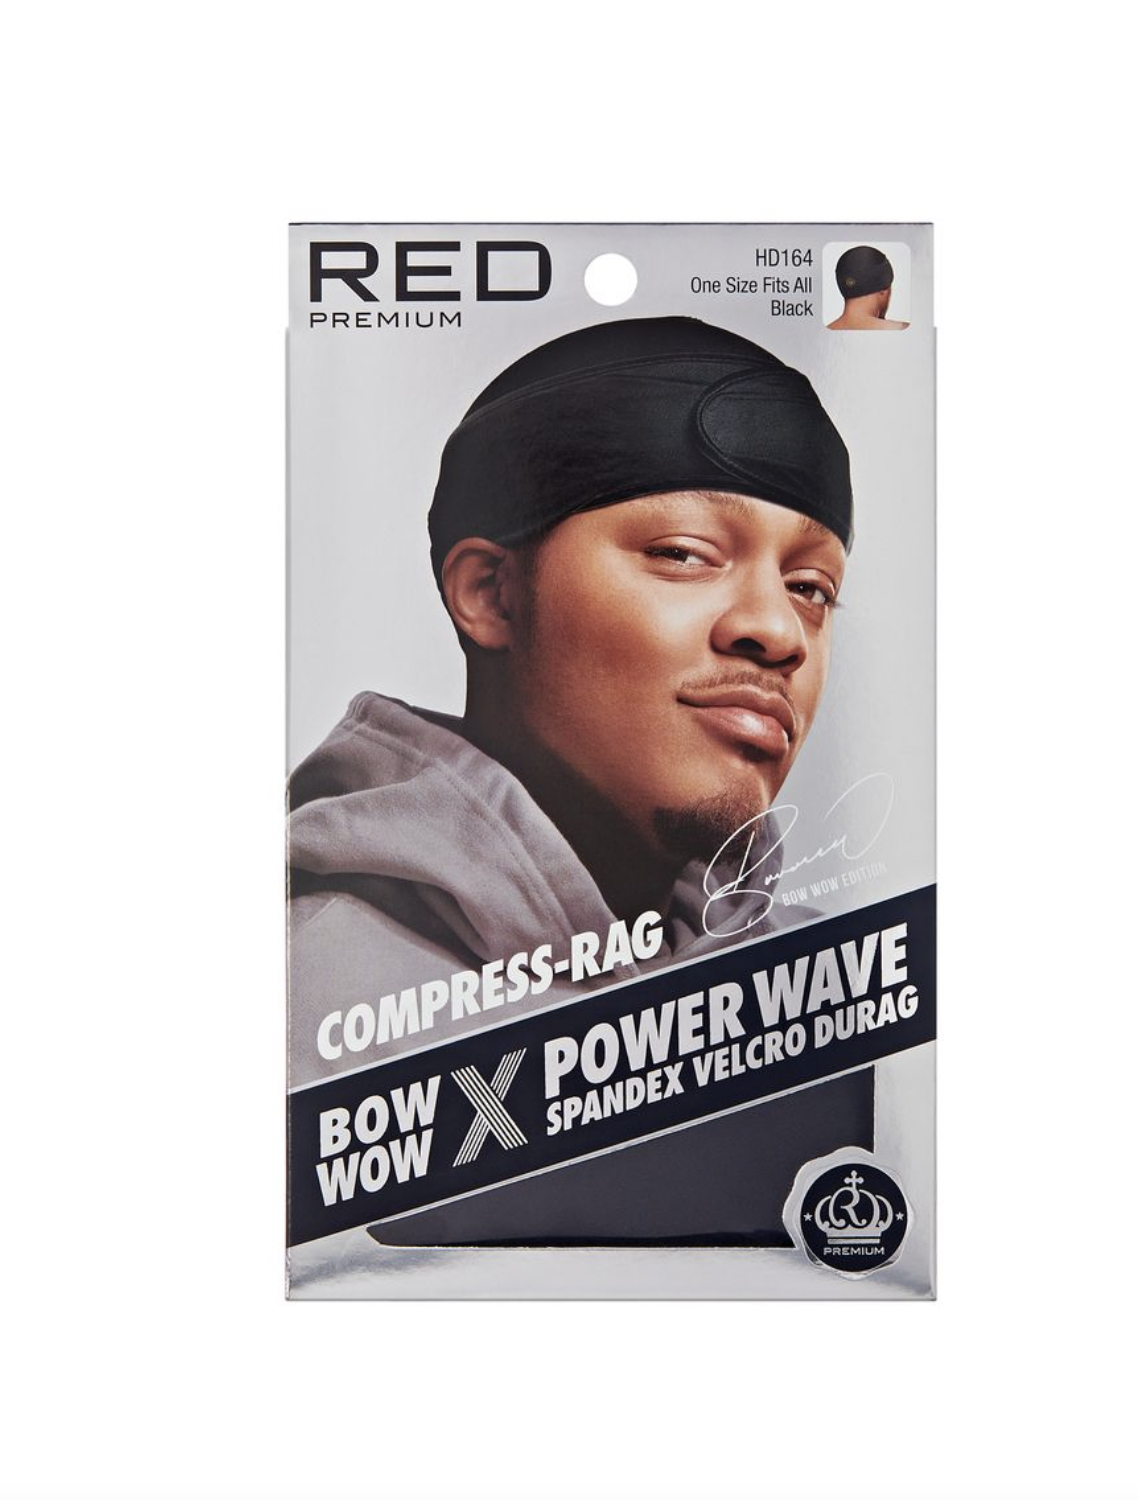 RED Power Wave Compress Rag Spandex Black #HD164 - BPolished Beauty Supply